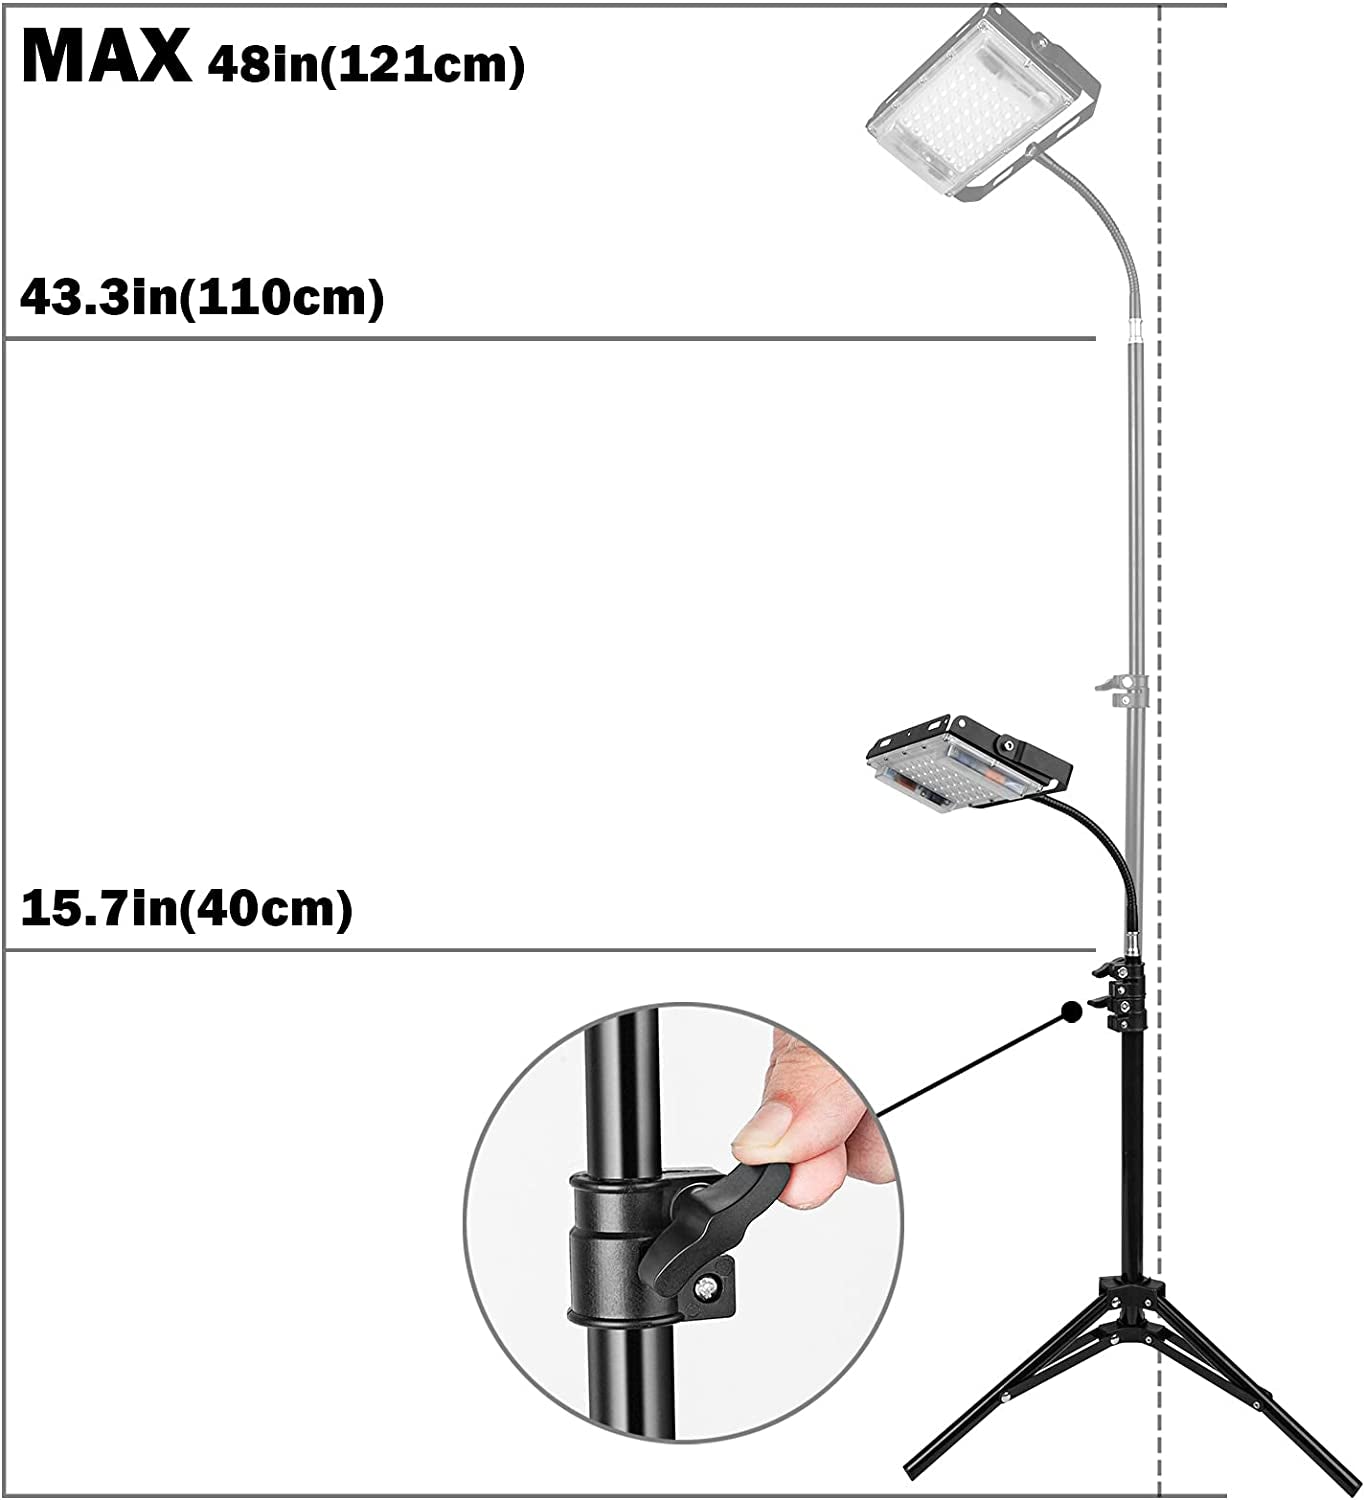 Grow Light with Stand, Full Spectrum 150W LED Floor Plant Light for Indoor Plants, Grow Lamp with On/Off Switch, Adjustable Tripod Stand 15-48 Inches